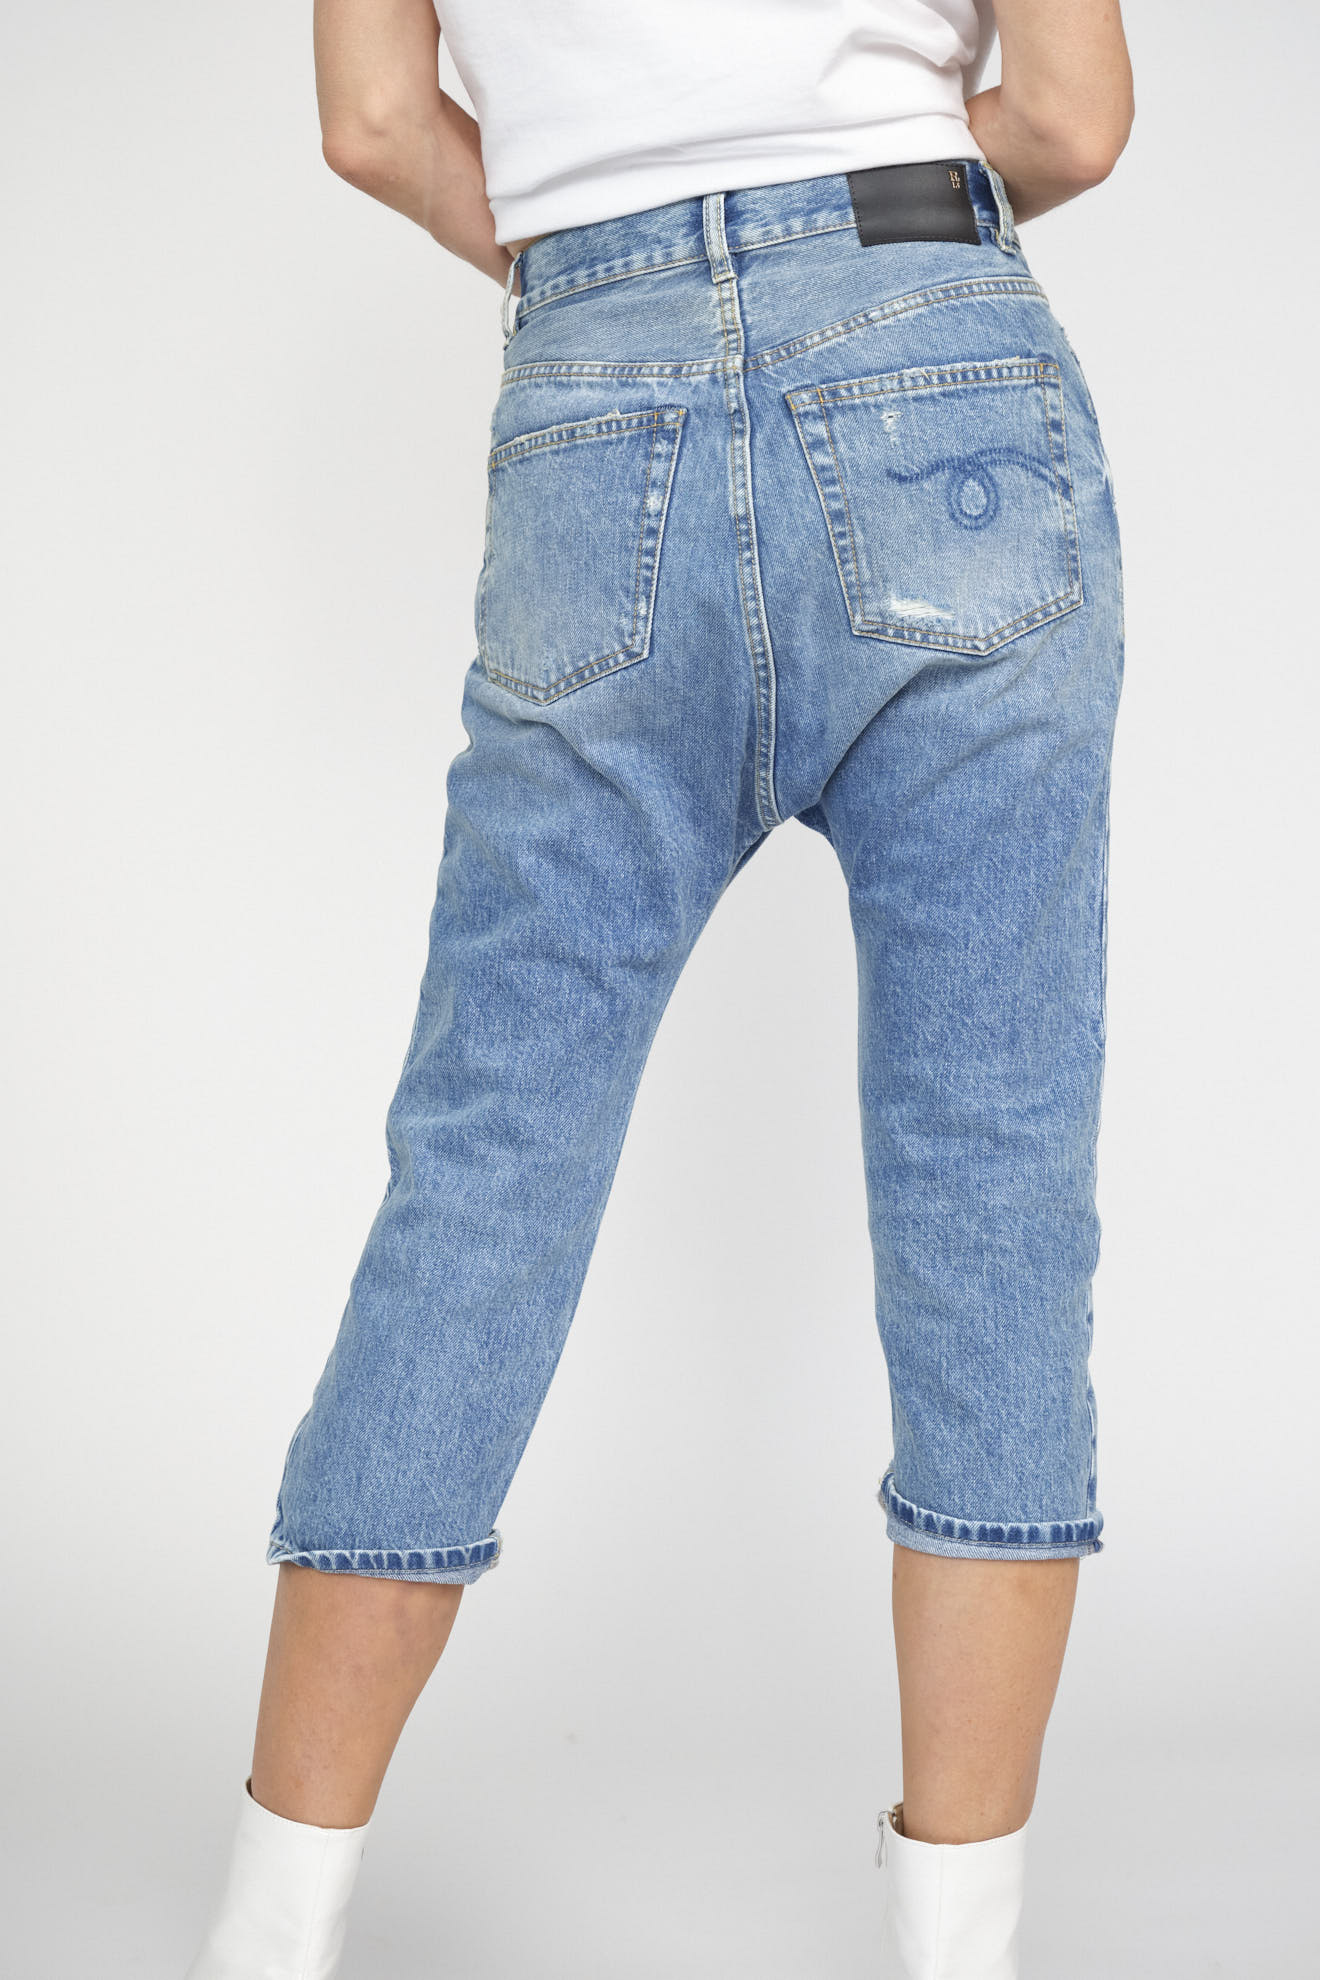 R13 Tailored Drop Jeans blue 27